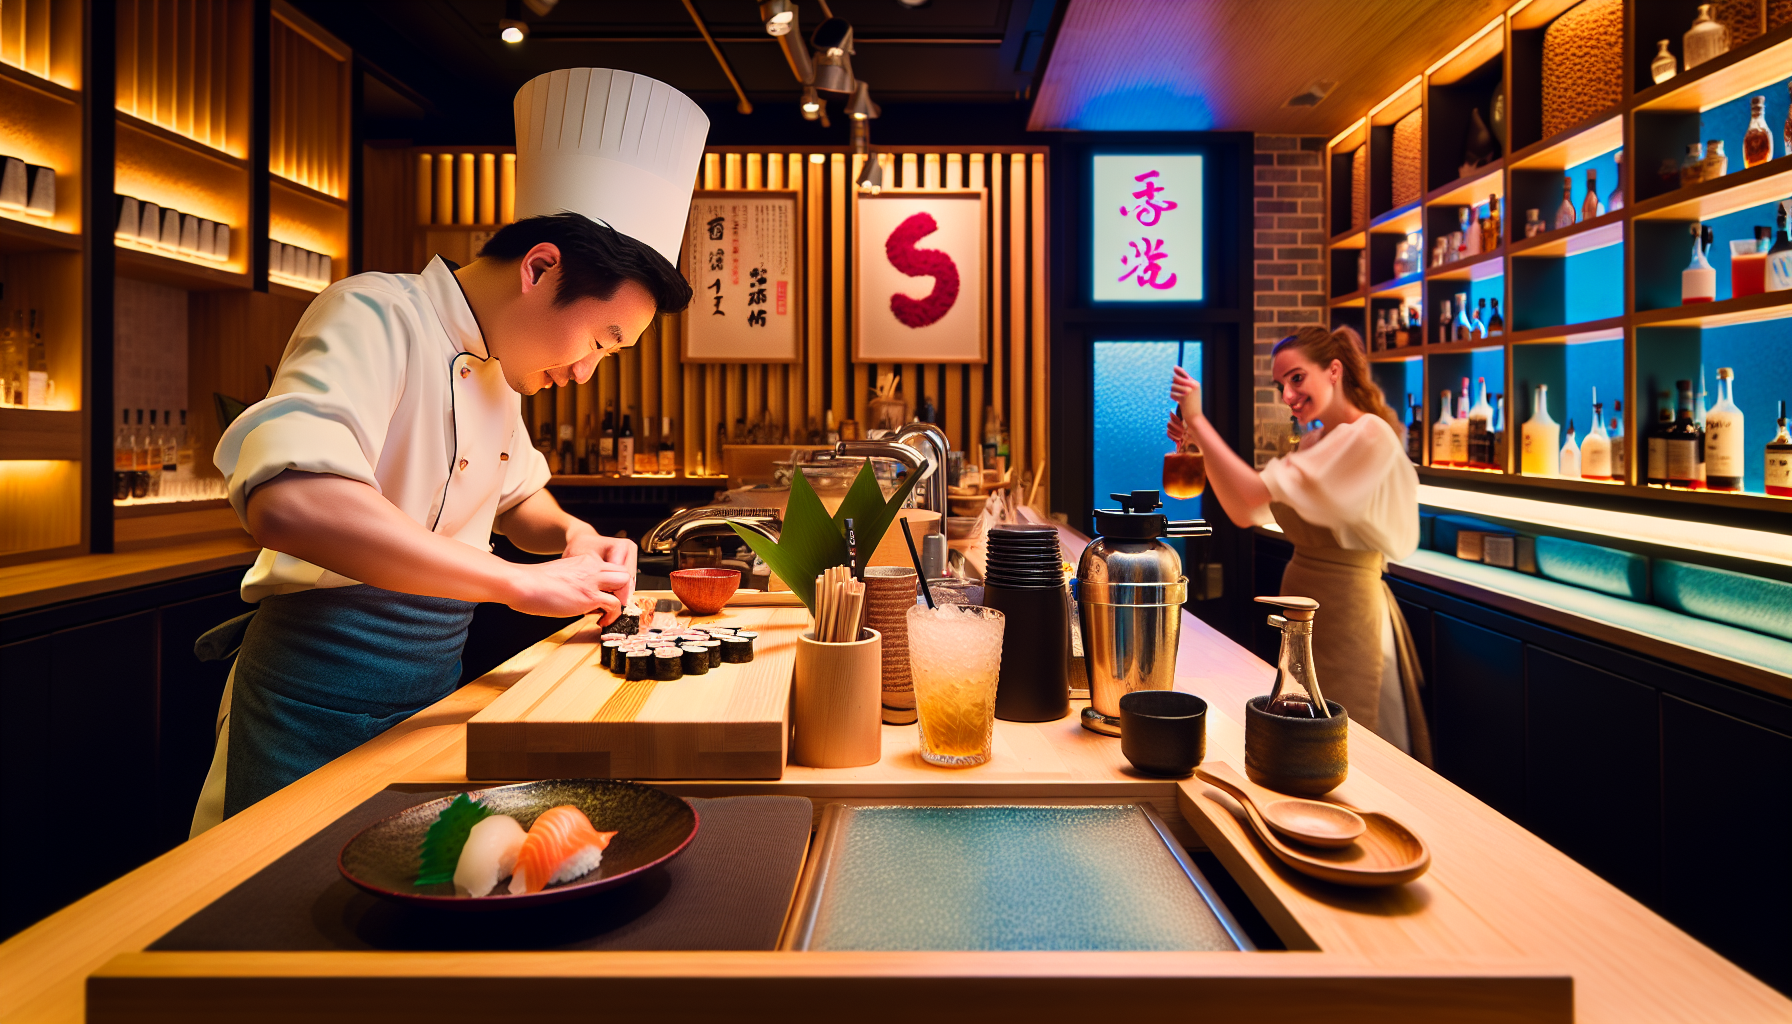 Sushi by Bou interior with traditional sushi omakase